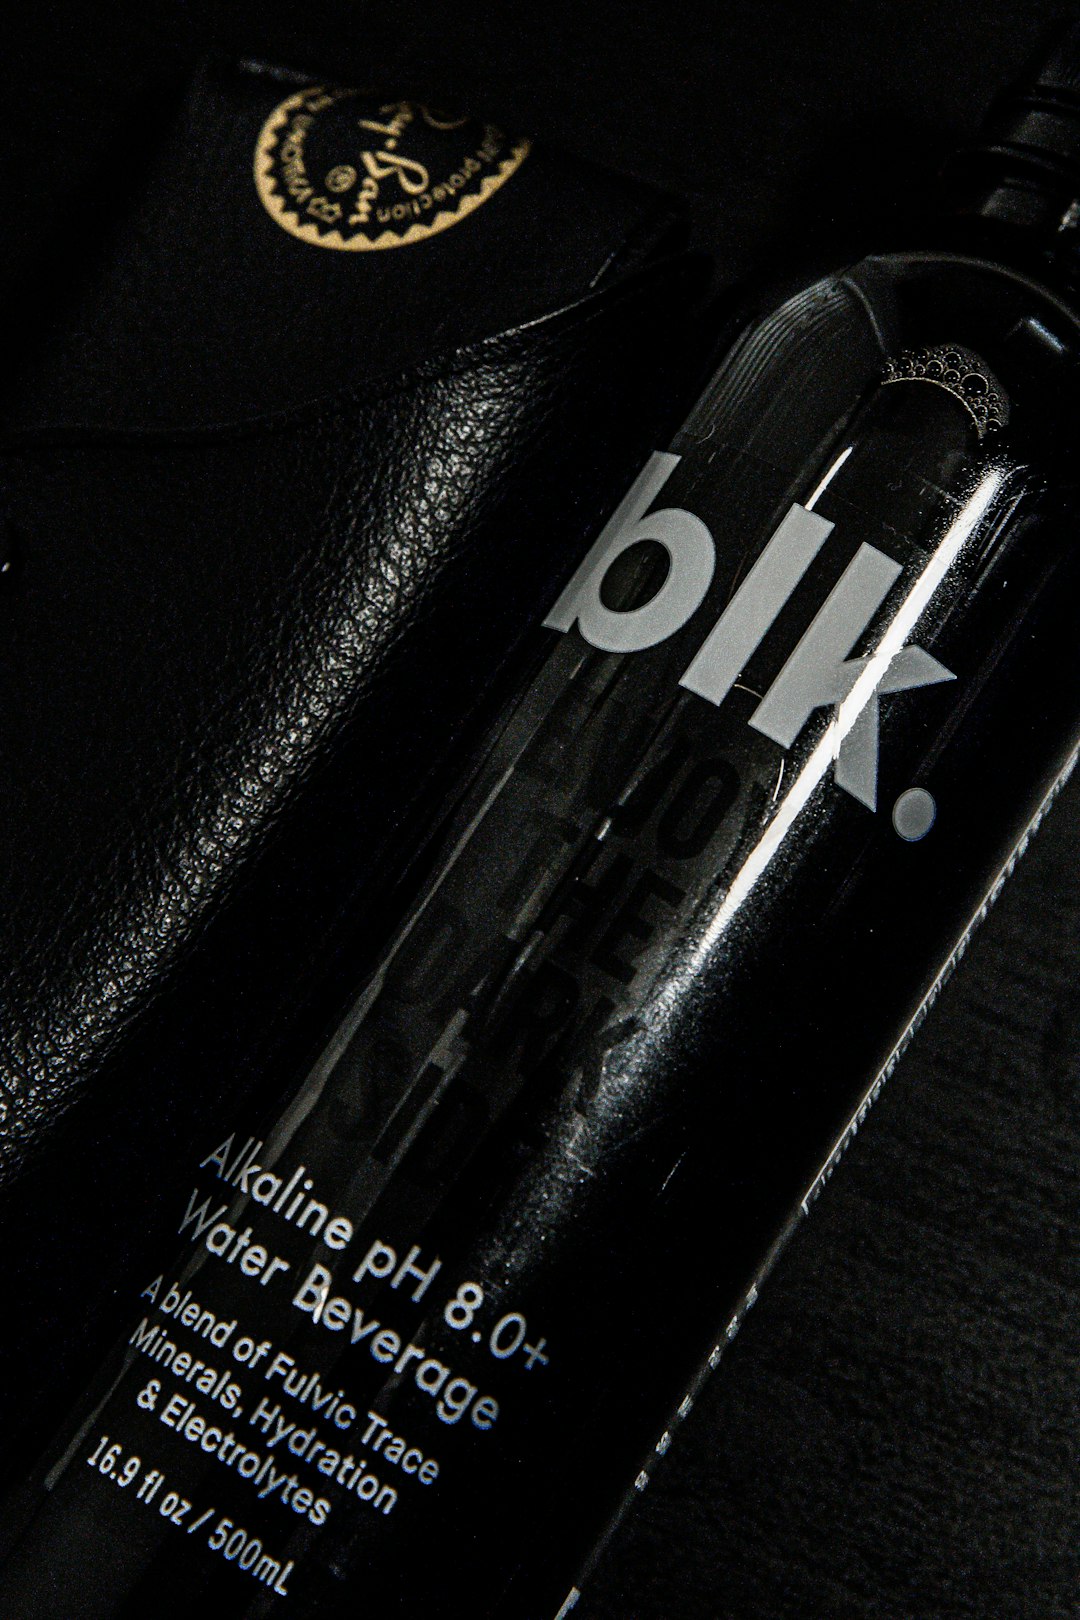 black and white labeled bottle